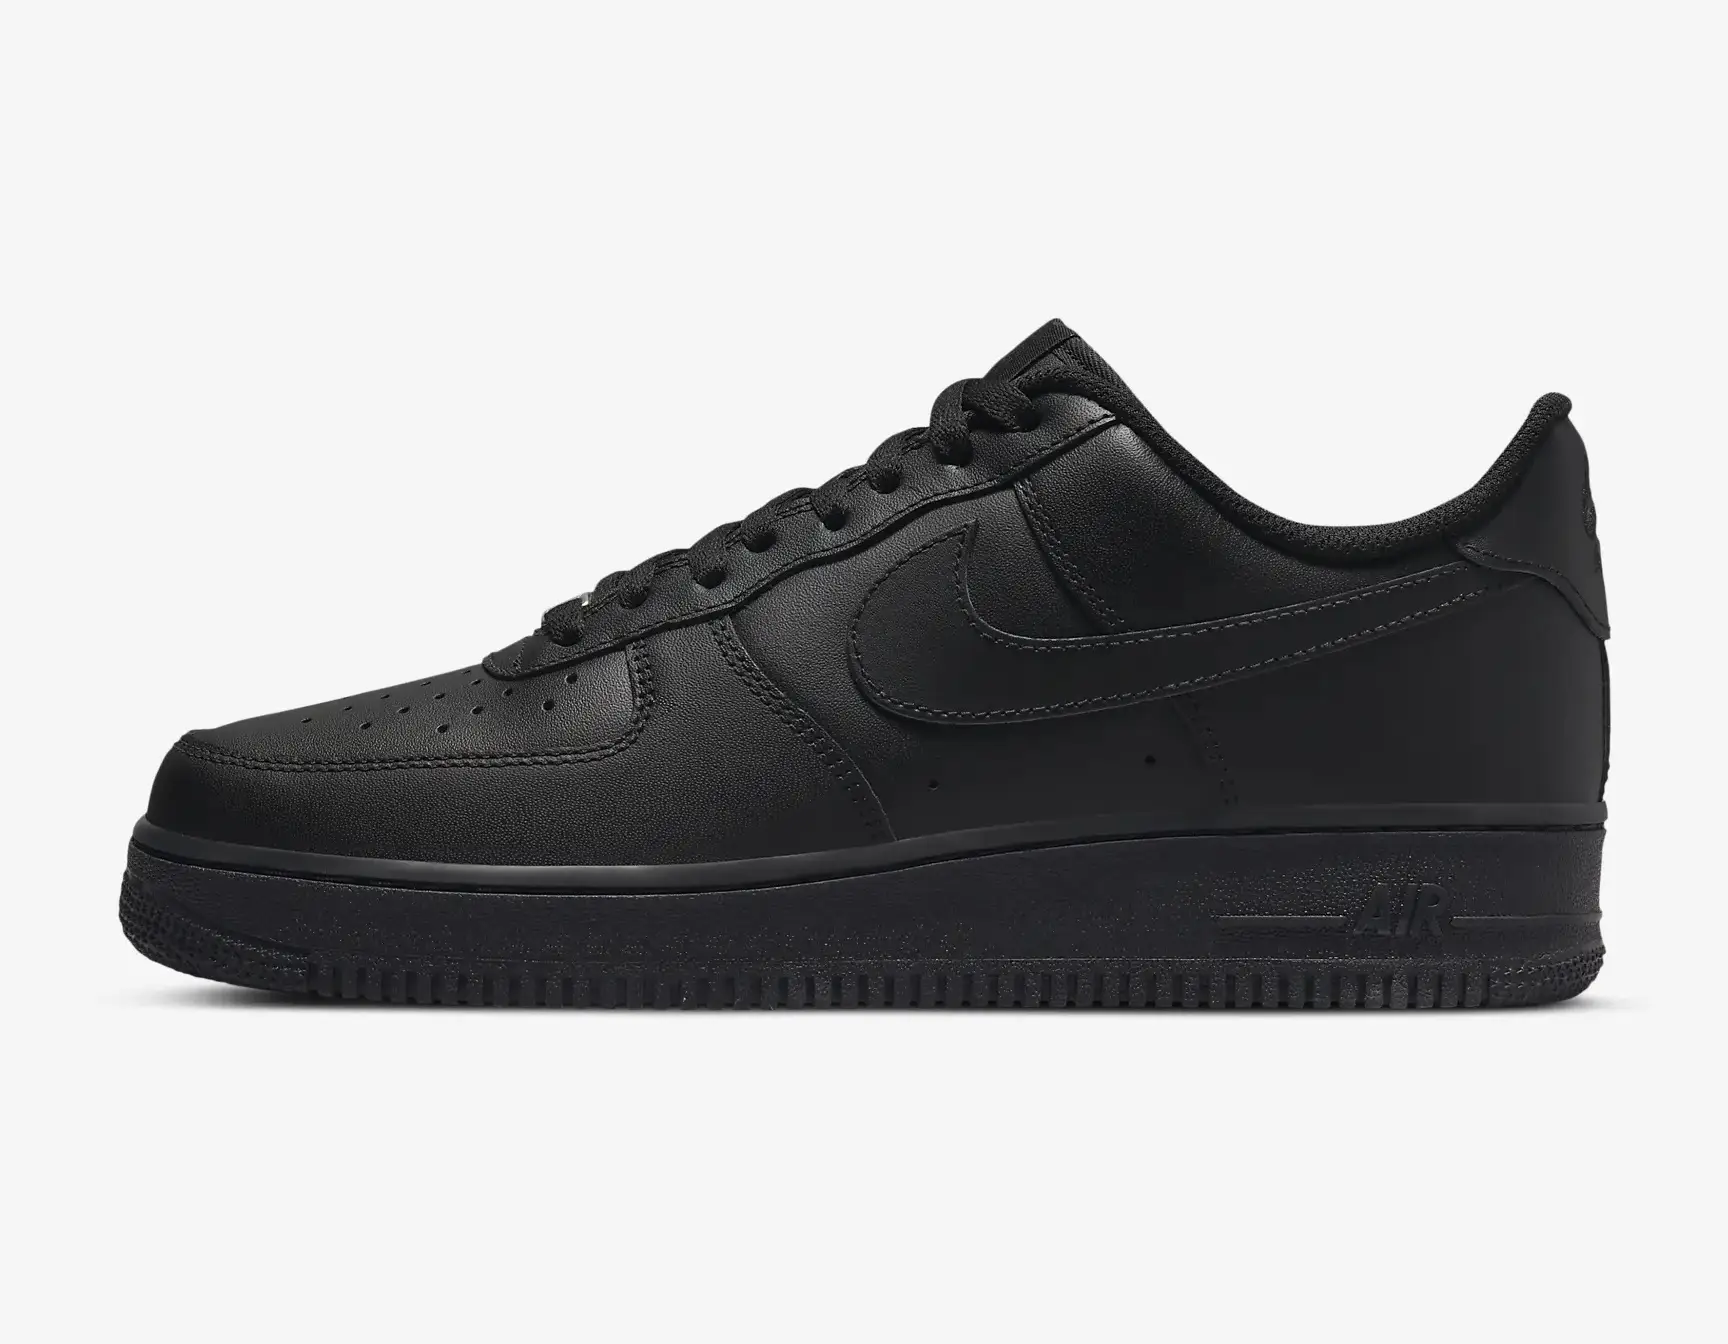 Nike Air Force 1 Sizing: Does the Air Force 1 Fit True to Size? | The ...